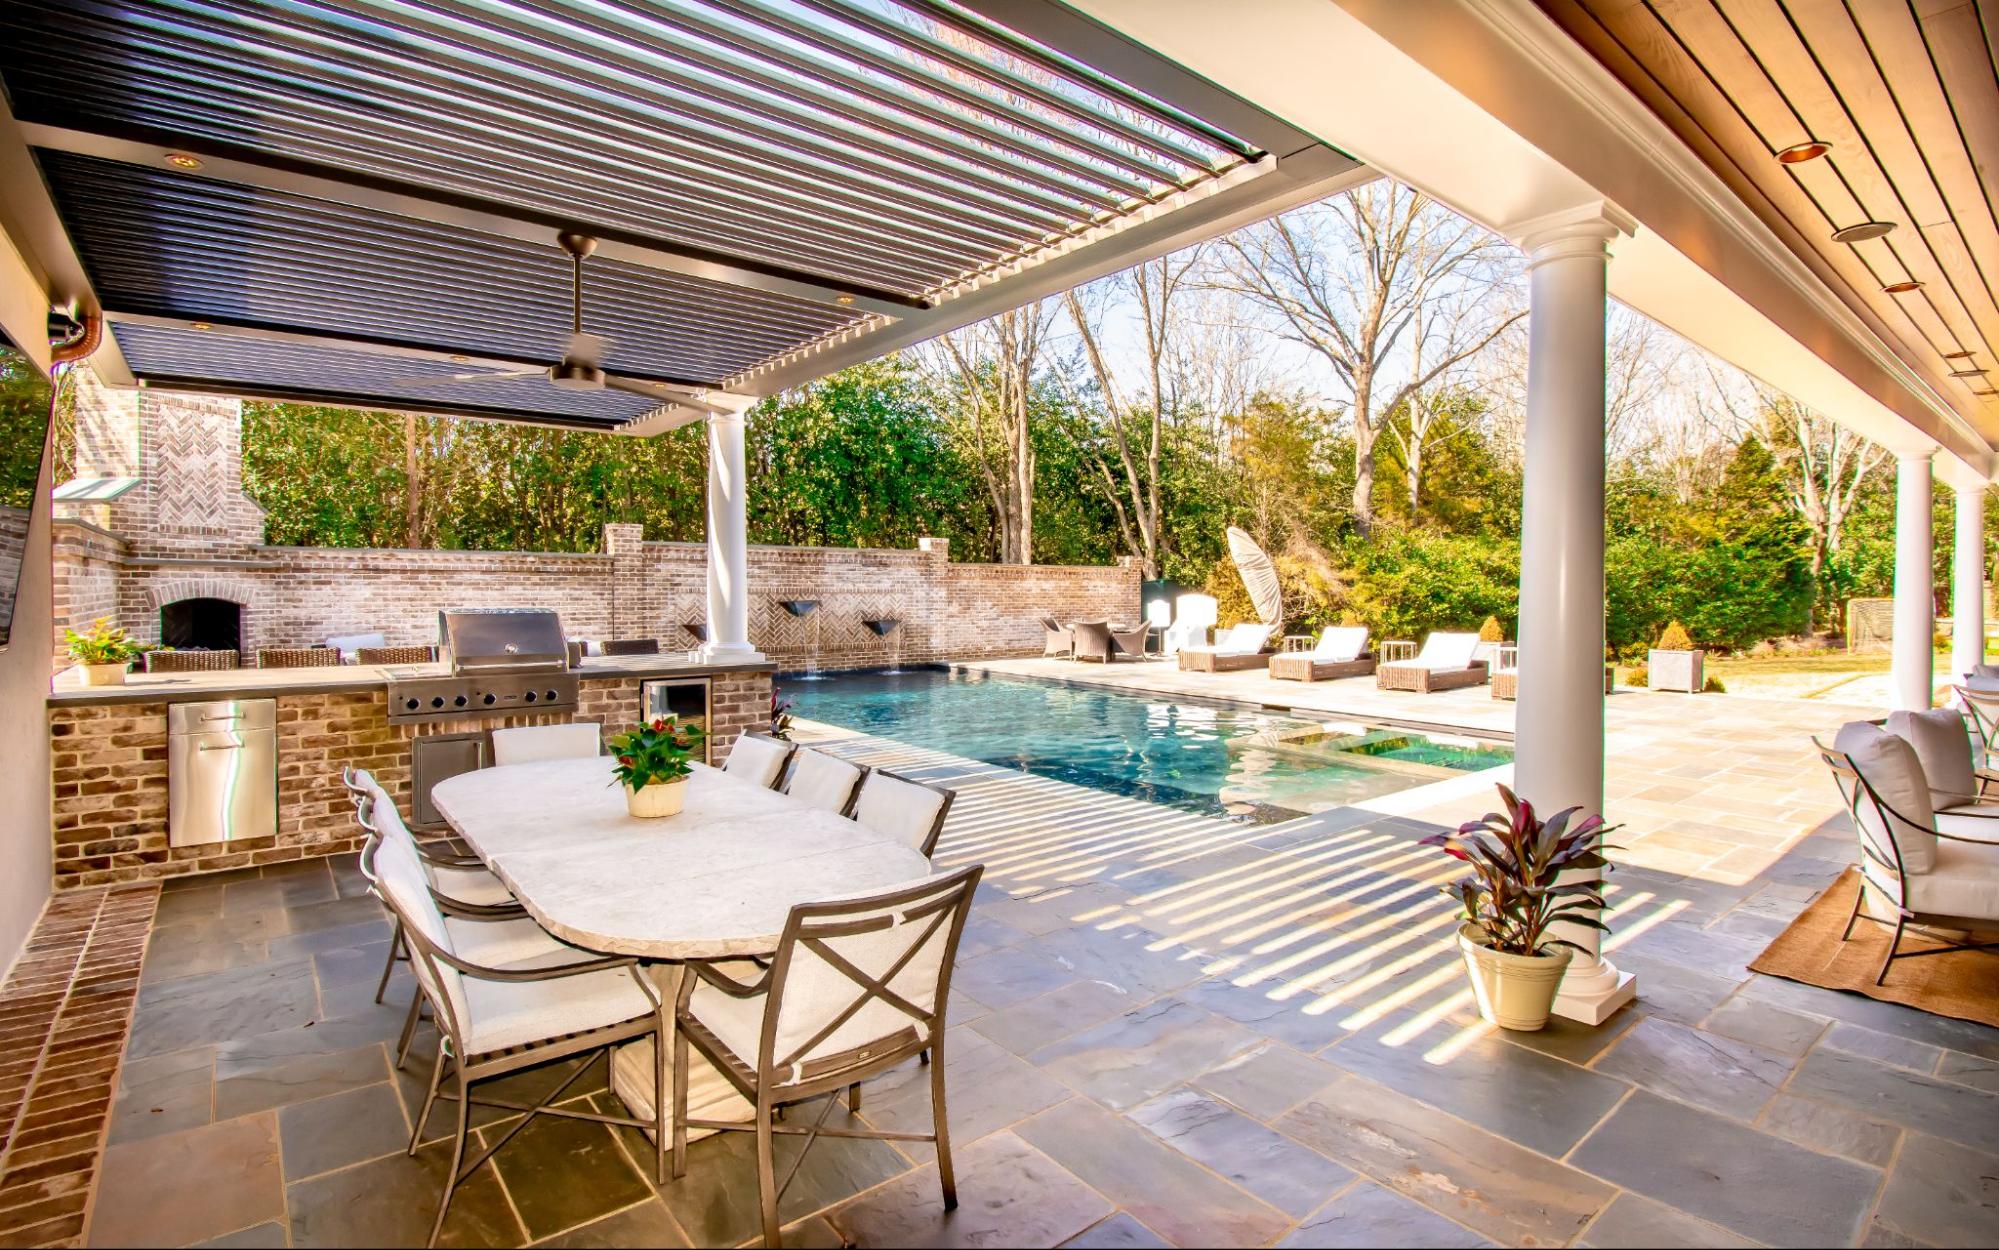 One of the modern pergola designs that features a StruXure pergola over a patio with an outdoor kitchen and dining area